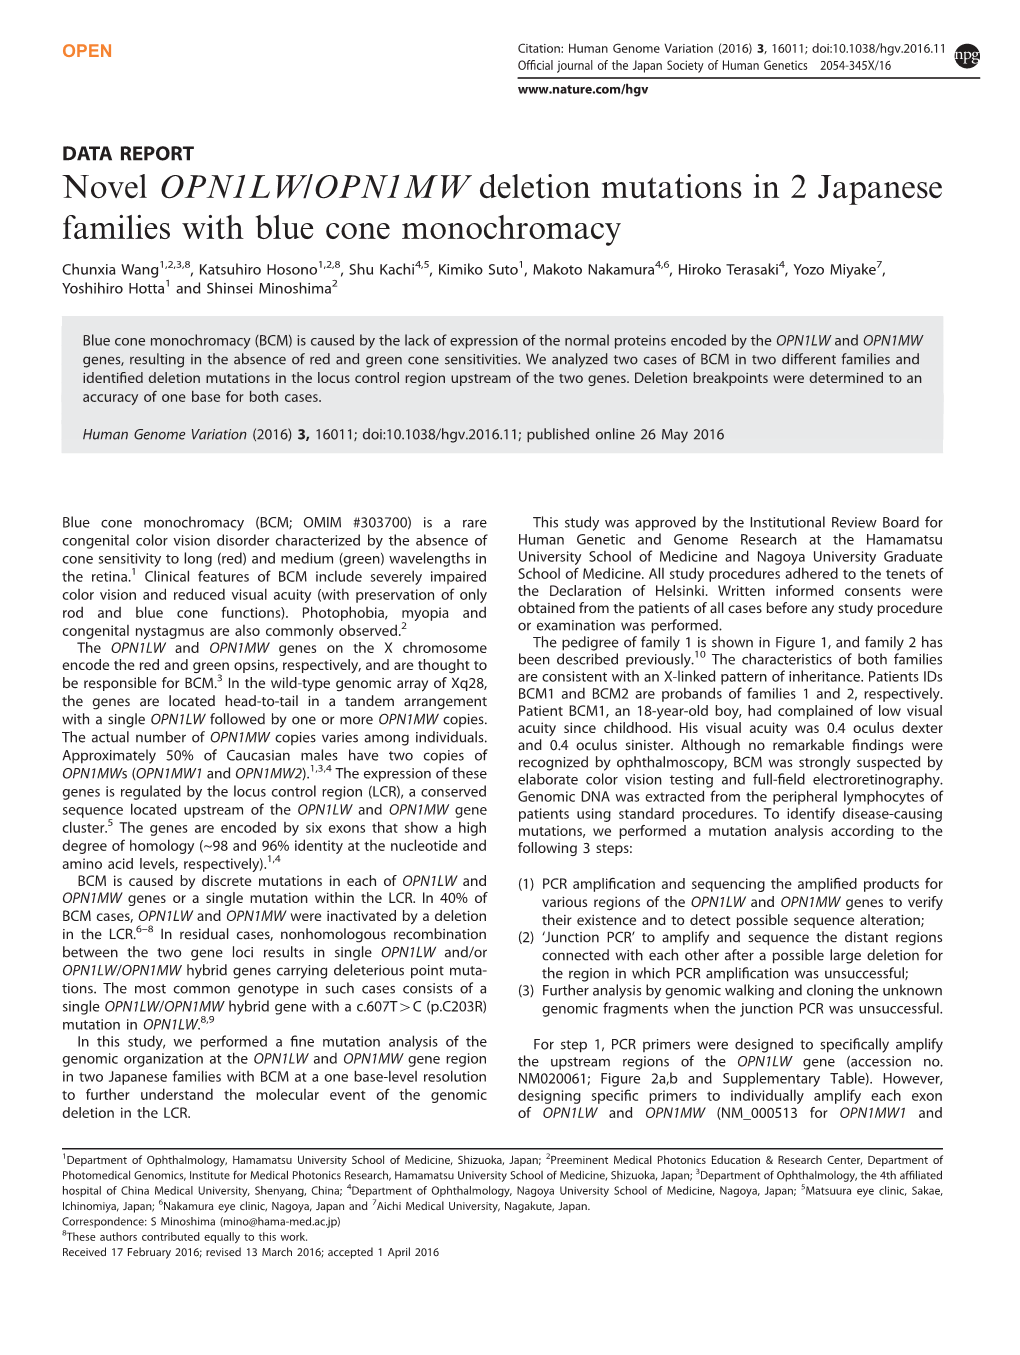 Novel OPN1LW/OPN1MW Deletion Mutations in 2 Japanese Families with Blue Cone Monochromacy